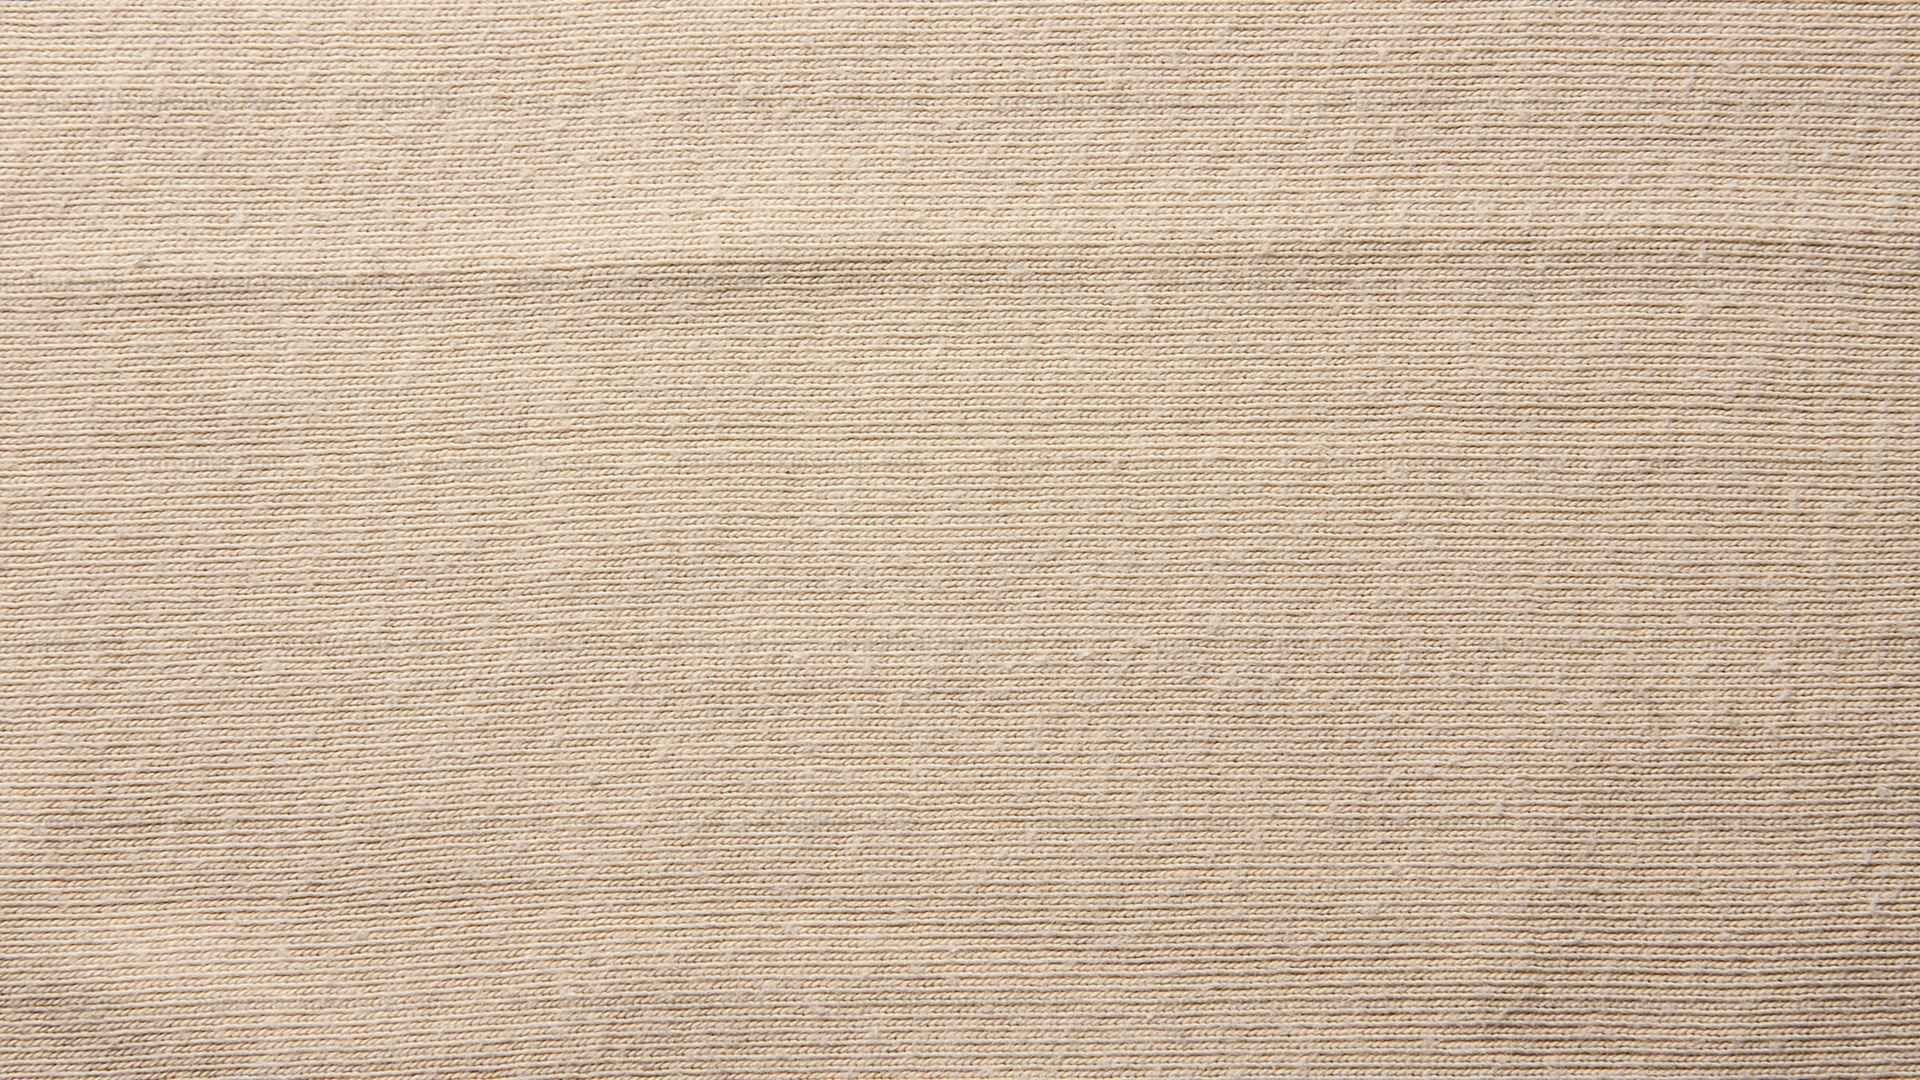 Light Brown Fabric Texture Background HD 1920 x 1080p